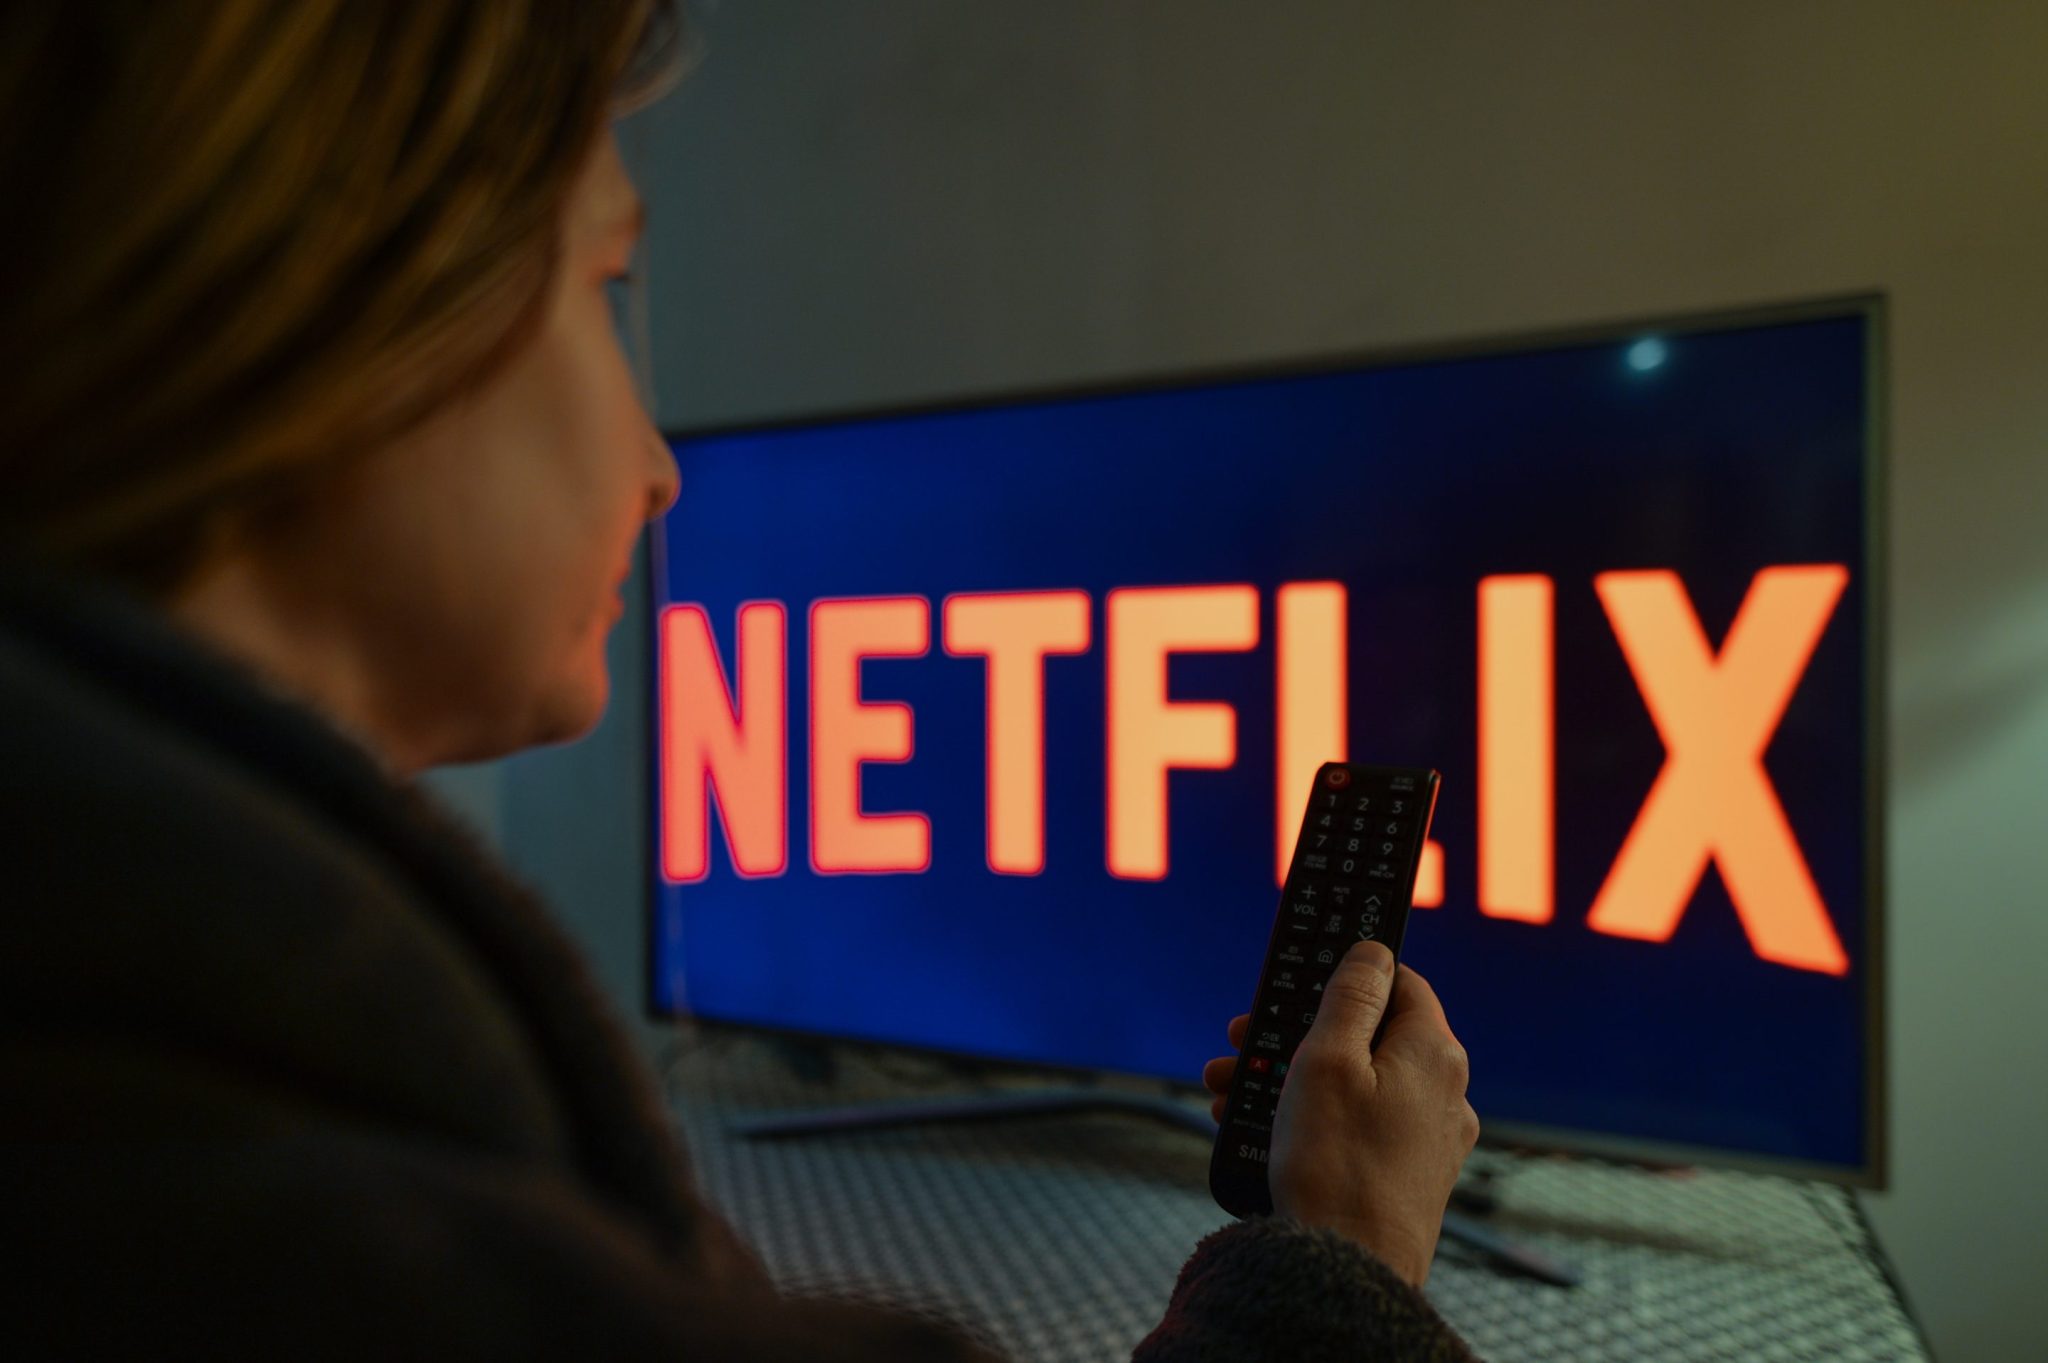 Netflix faces platform decay after streaming wars victory